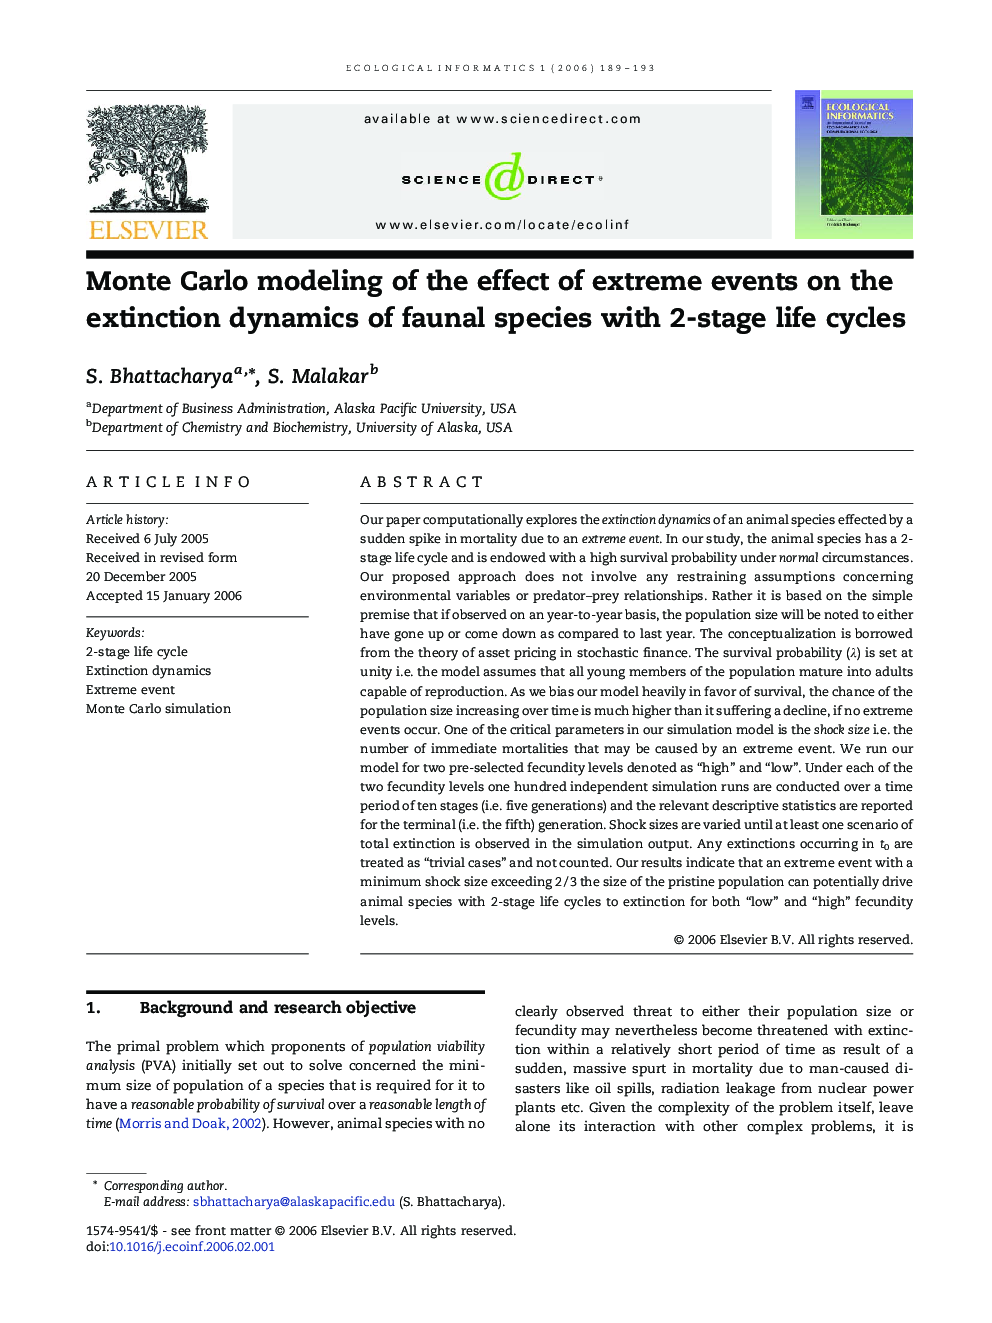 Monte Carlo modeling of the effect of extreme events on the extinction dynamics of faunal species with 2-stage life cycles